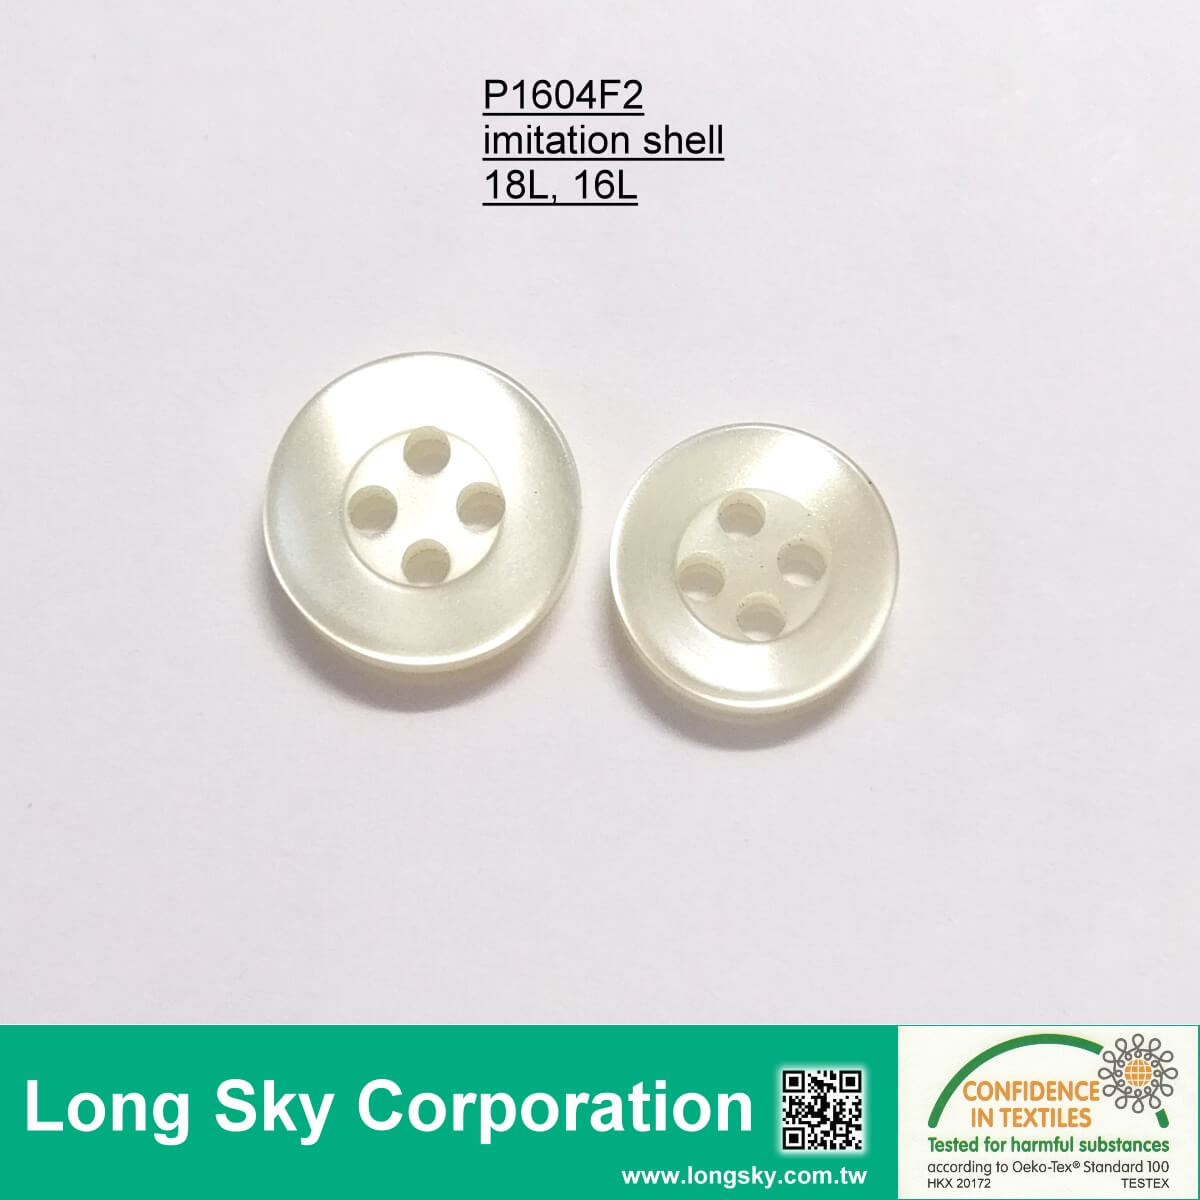 (P1604F2) 18L, 16L Cream Imitation Shell Button for Blouse, Shirt and Garments